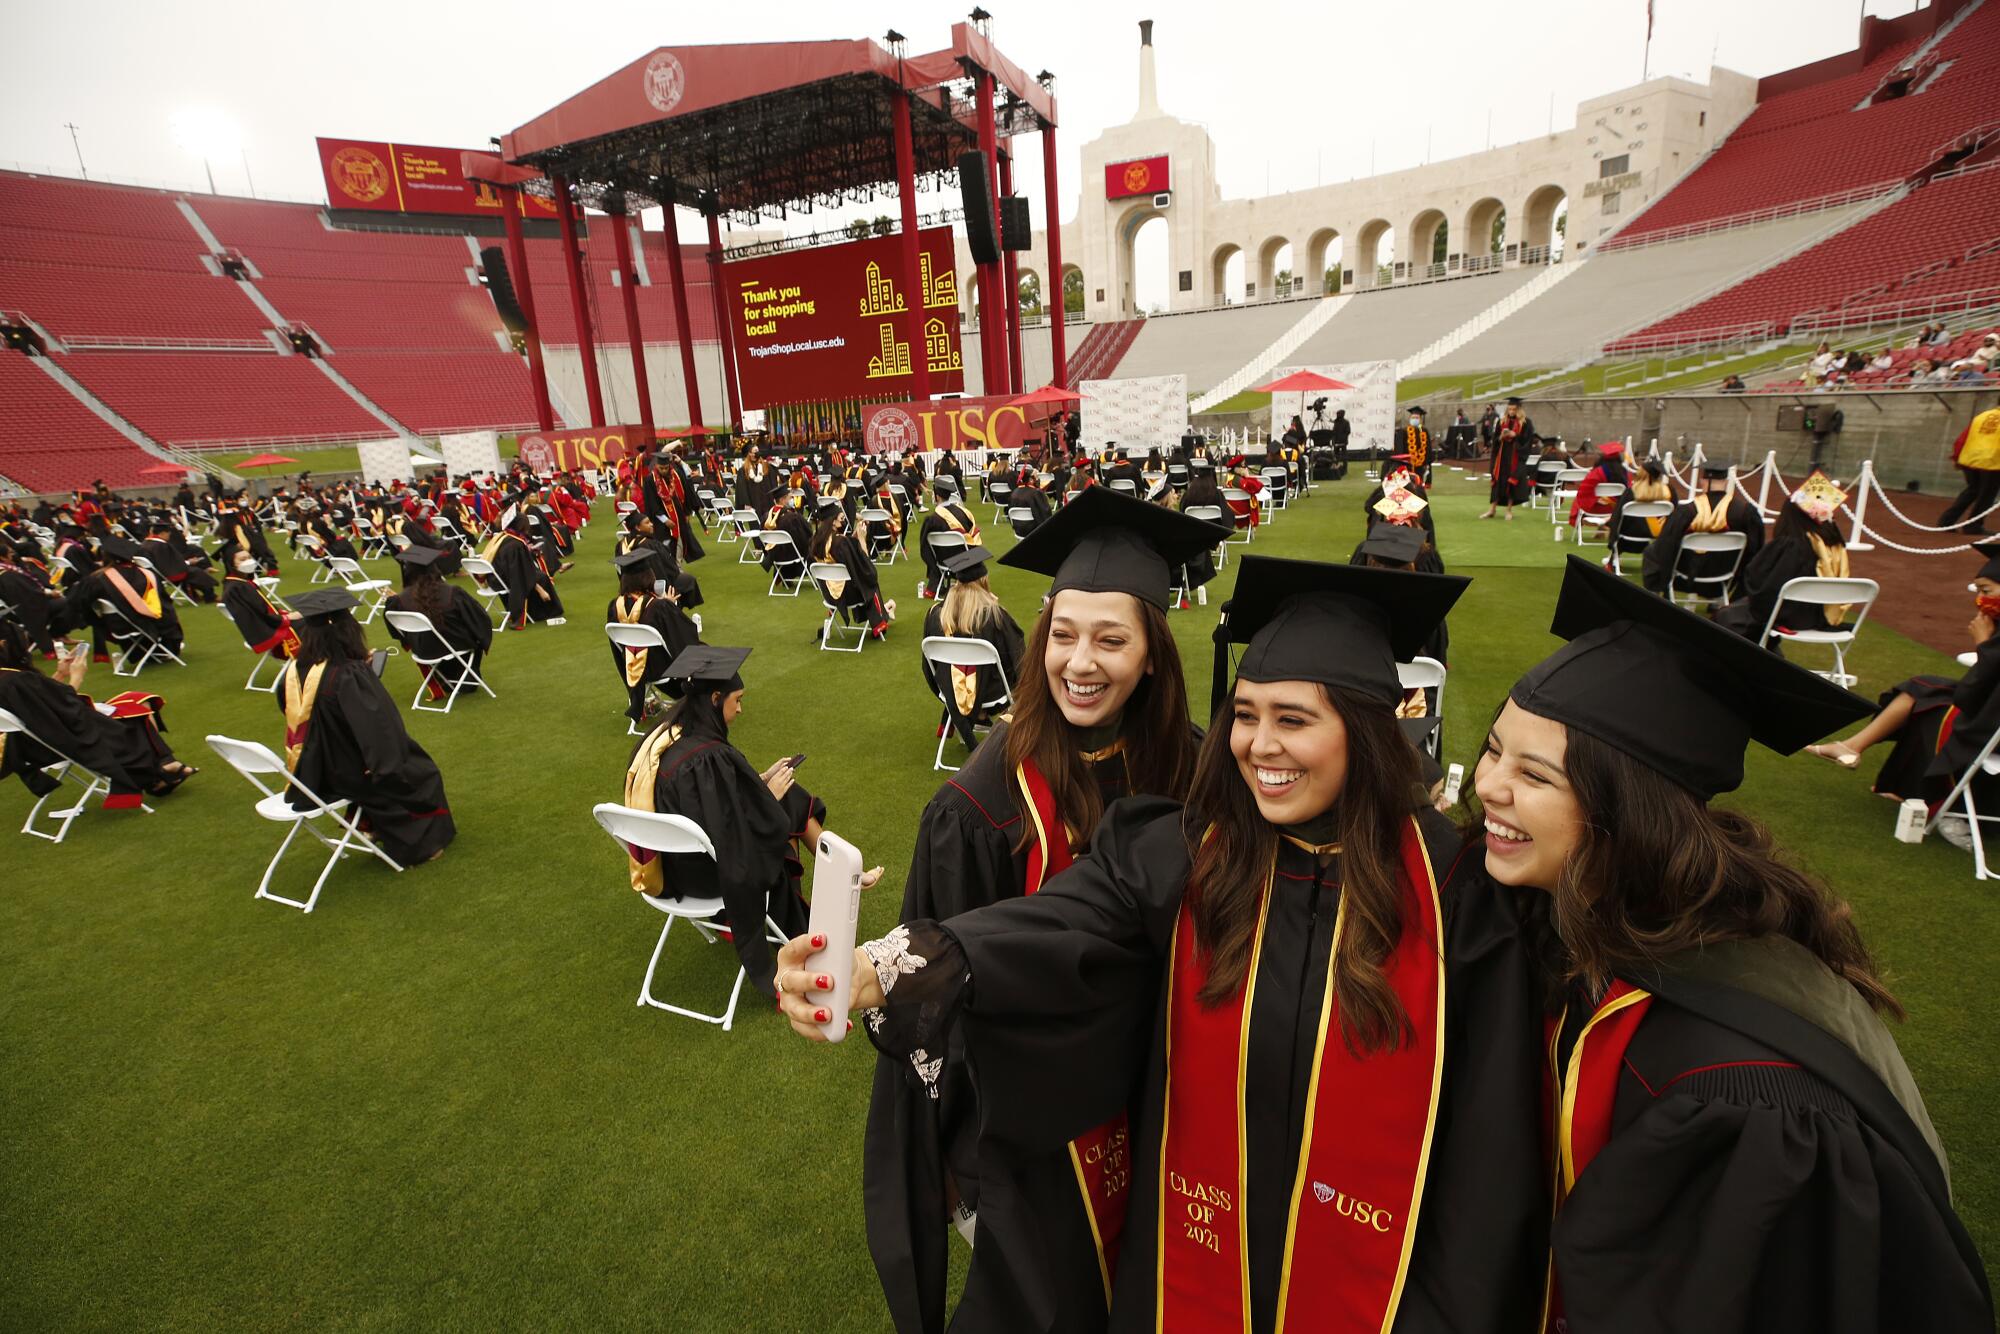 Three women in black graduation gowns with red sashes smile at a phone for a selfie in front of a stage